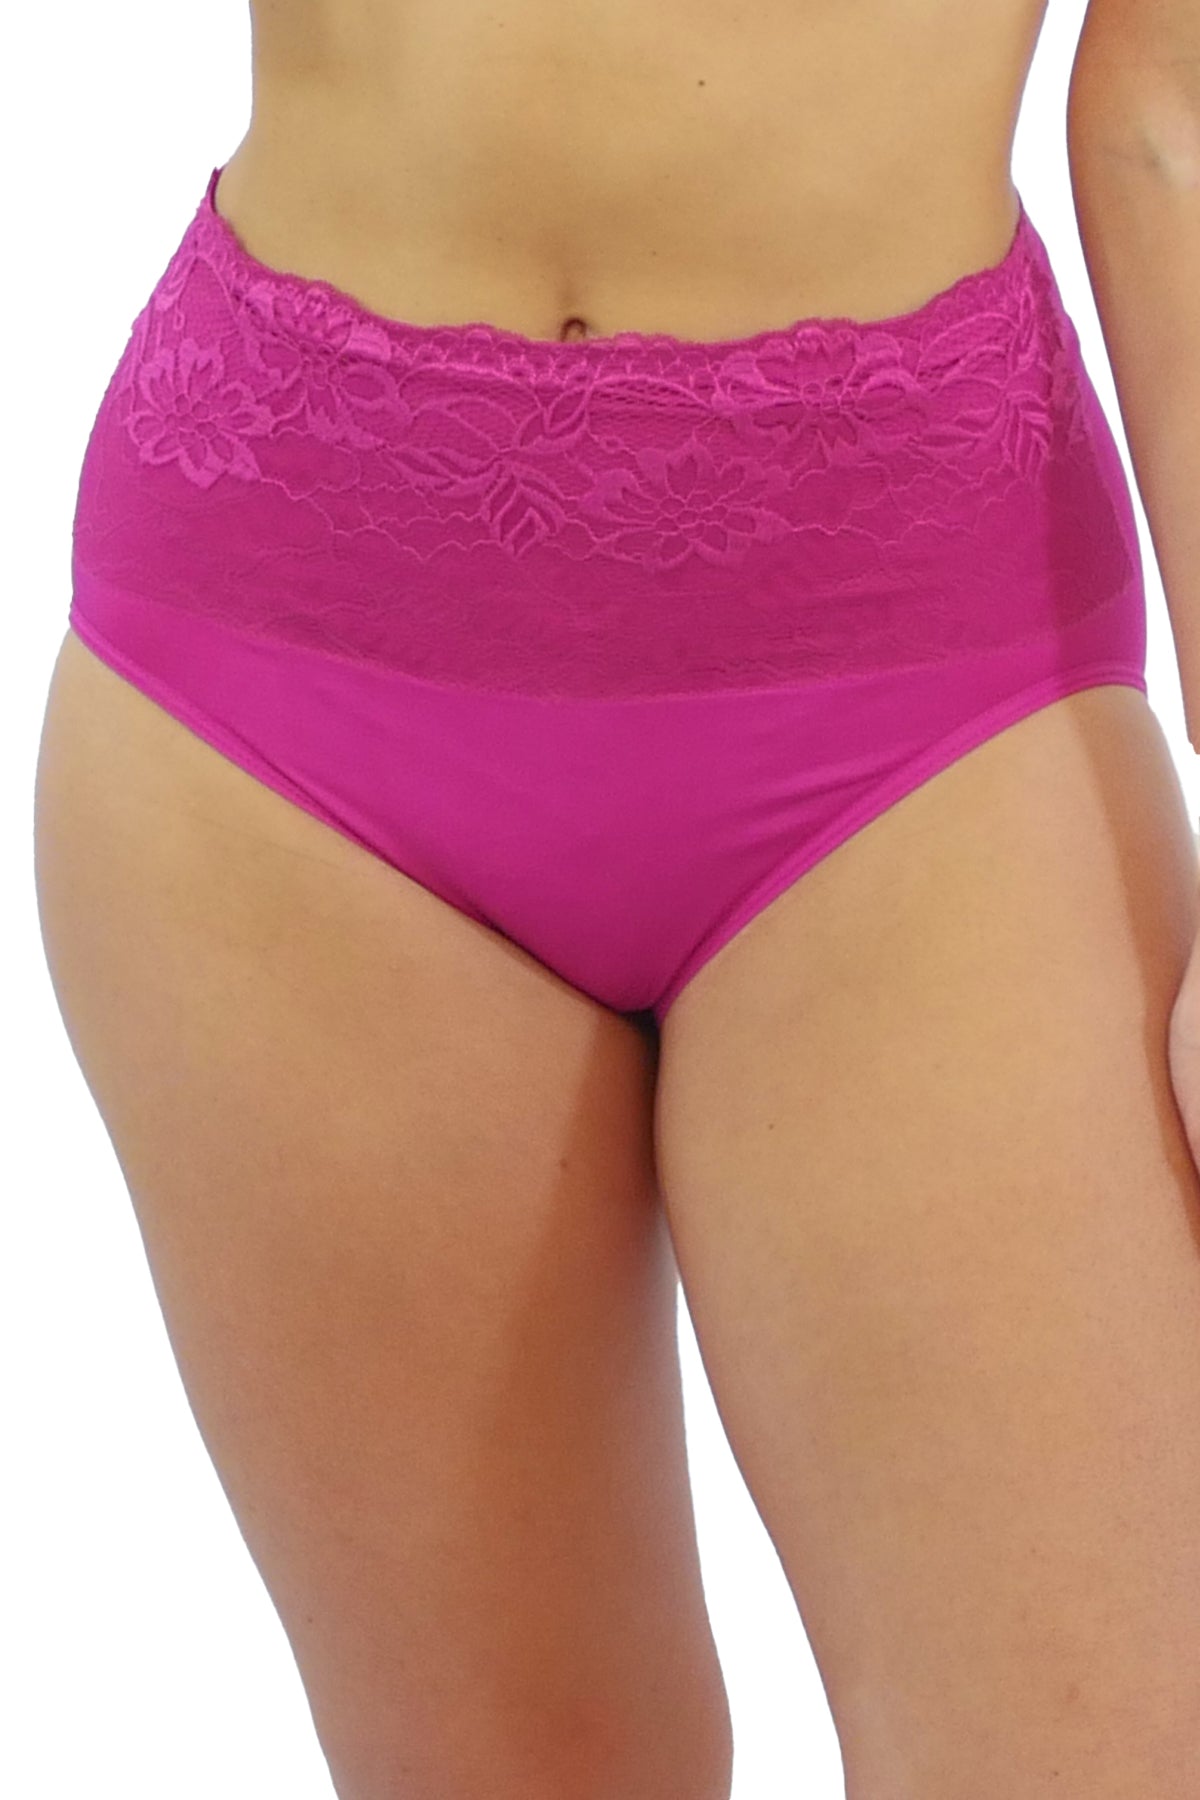 High Waisted Knickers Sexy Briefs Women Sheer Underwear Lace Seamless  Panties x1